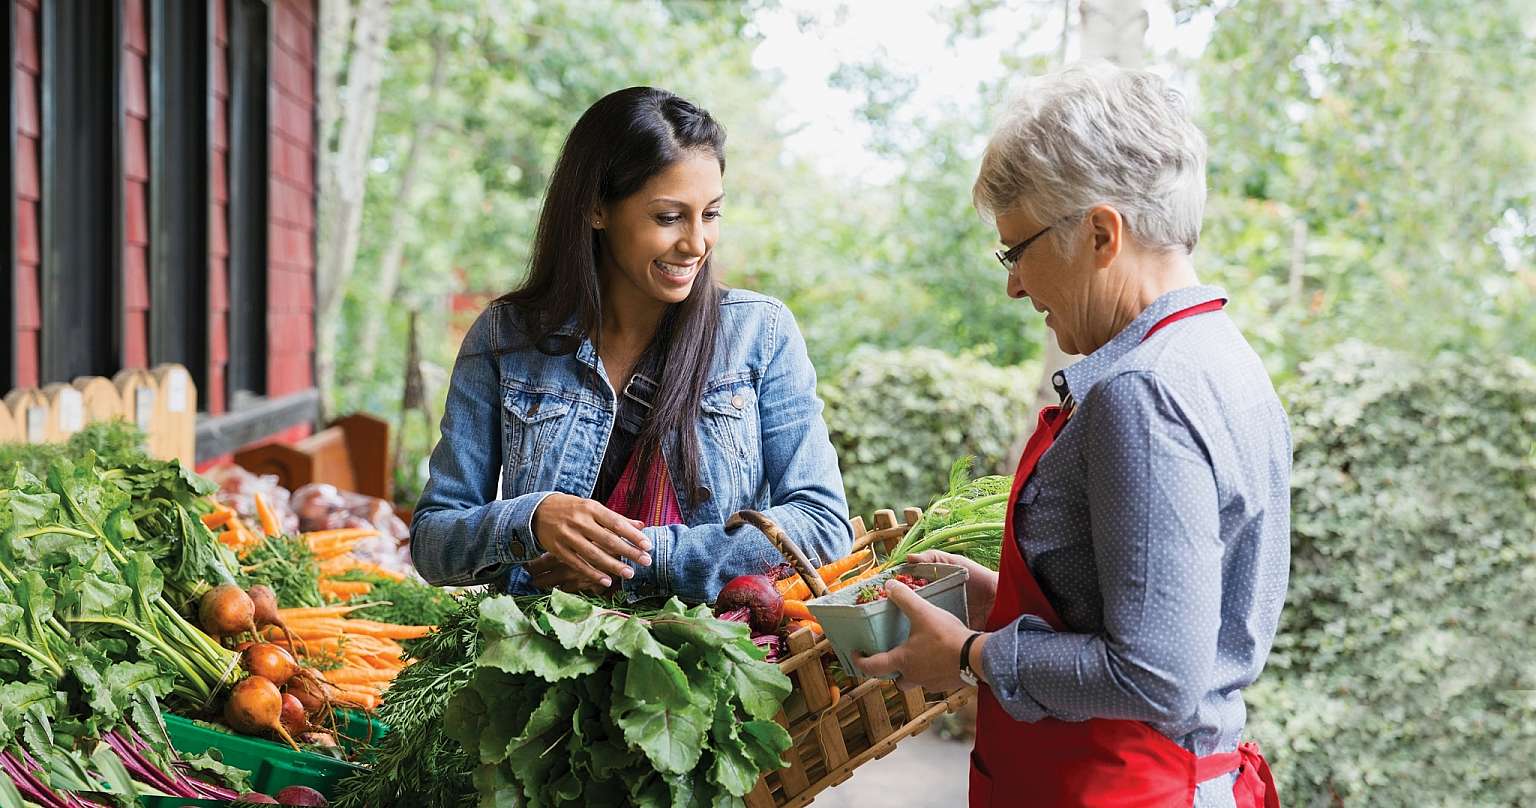 Women Talking at Vegetable Stand